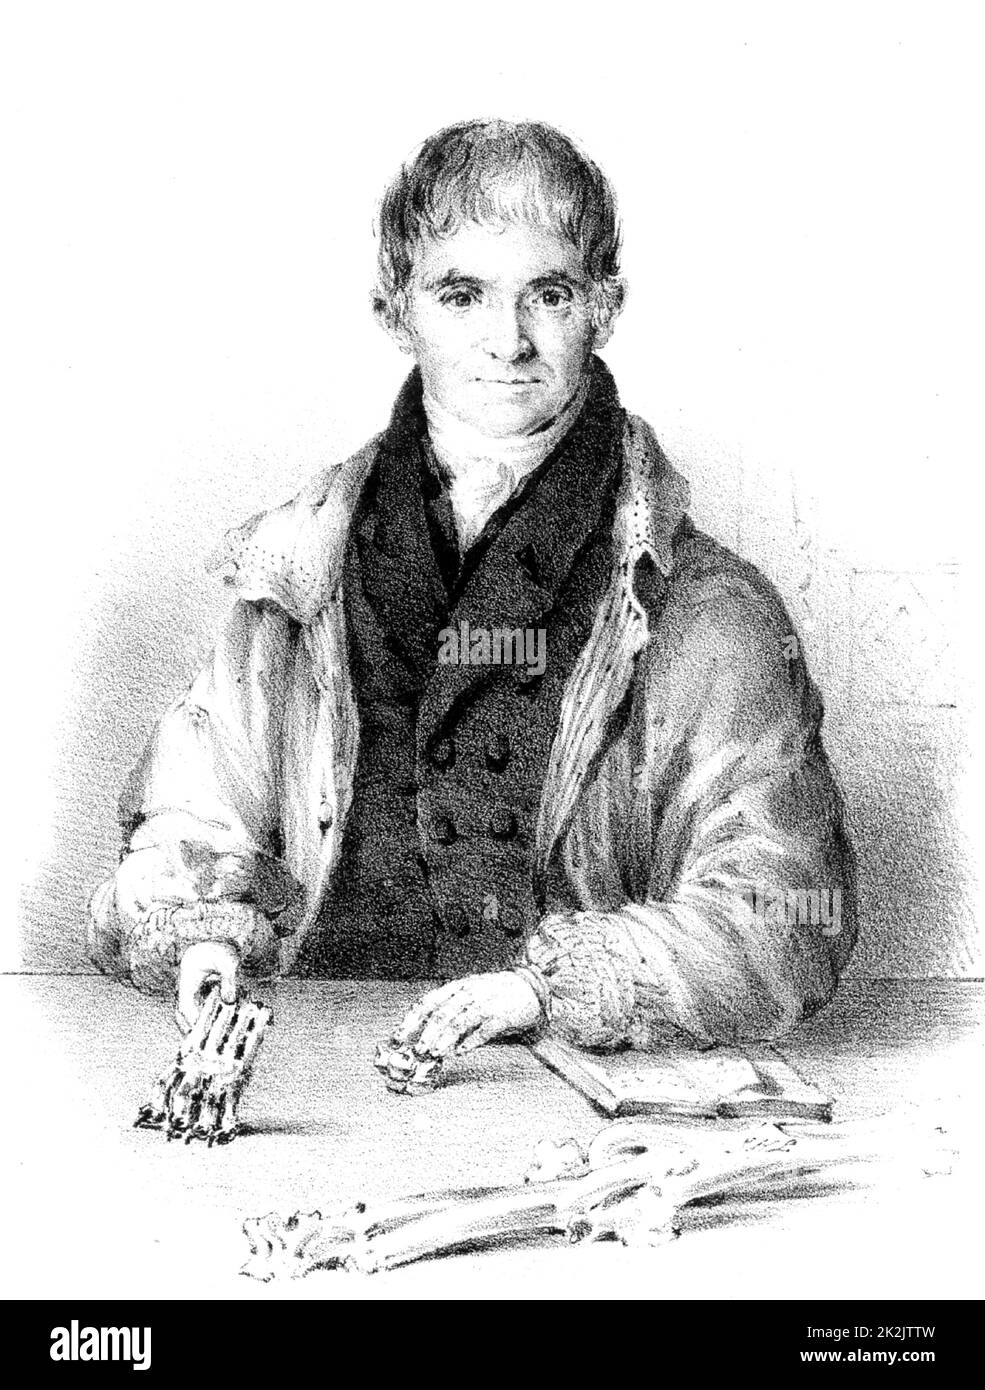 William Beard (1772-1868), English farmer turned fossil collector from North Somerset. In the 1820s workmen broke through into the Banwell Bone Cave. Between then and about 1840 Beard collected thousands of specimens of fossilised animal bones and his collection is now in the Castle Museum, Taunton, Somerset. He was sponsored by George Henry Law (1761-1845), Bishop of Bath and Wells, who considered the finds to be proof of Noah's Flood. Beard at 57, lithograph from 'Delineations of Somersetshire' by John Rutter (Shaftesbury, 1829). Stock Photo